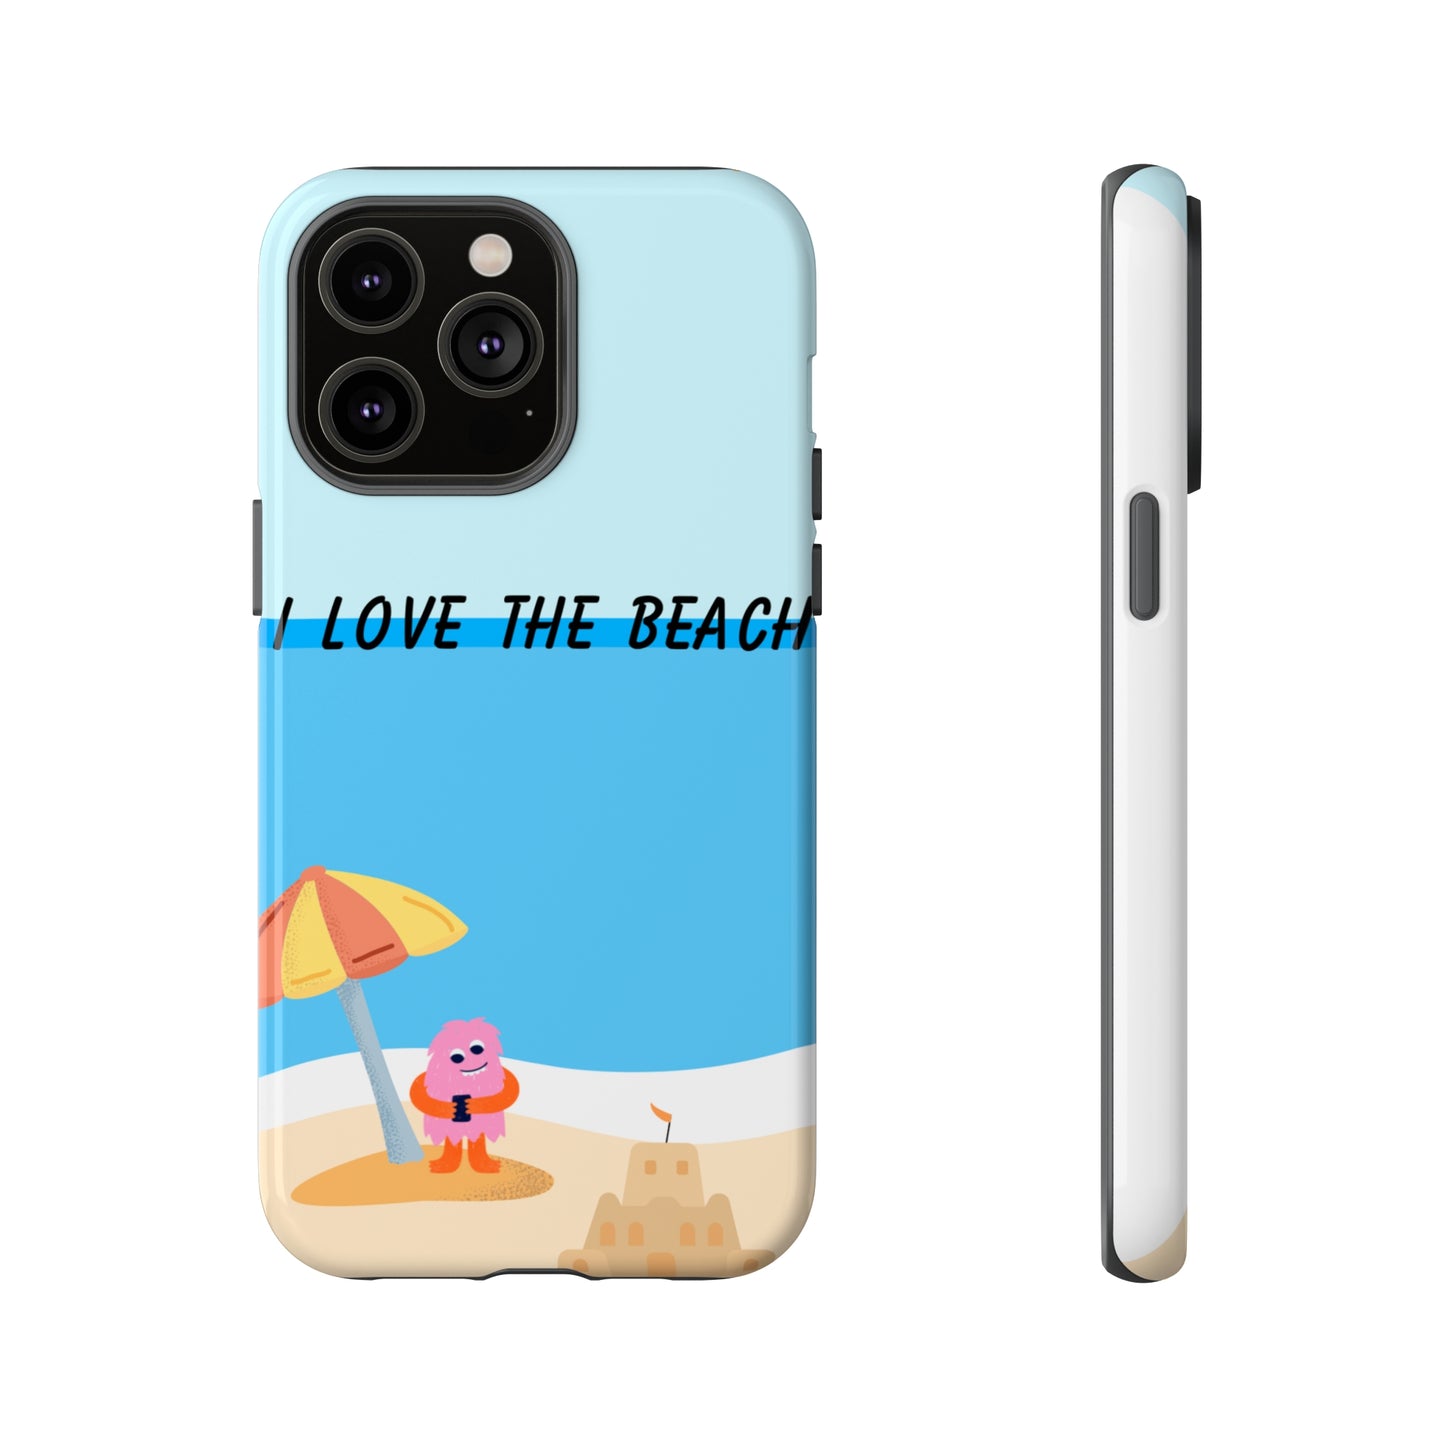 "Design your style: Personalized cases for iPhones